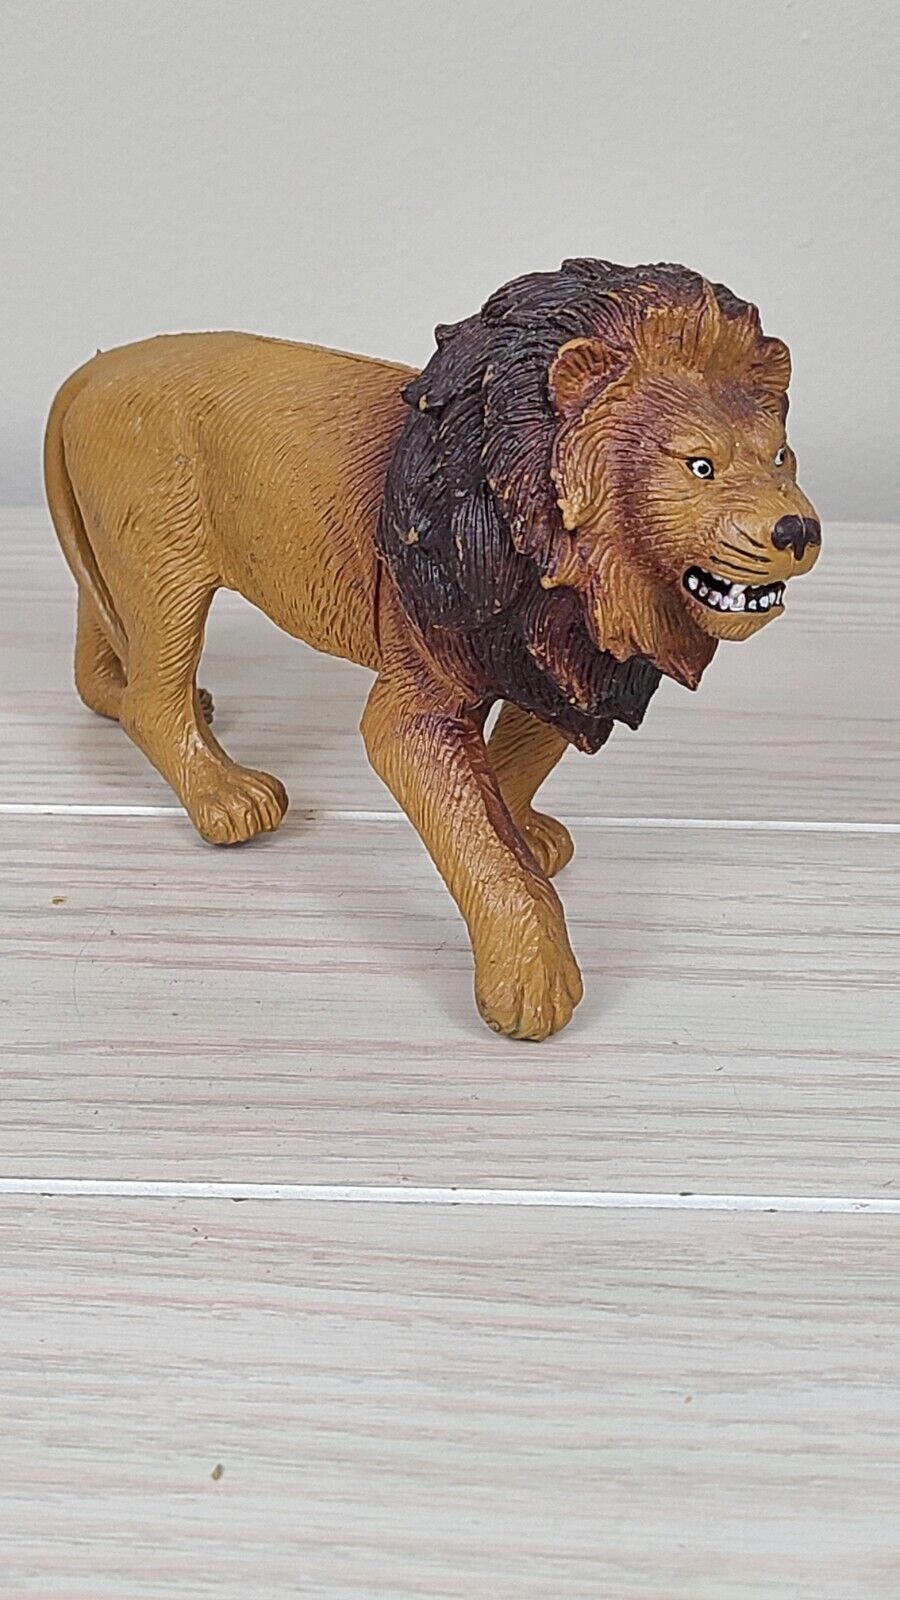 Vintage 1987 AAA Toy Lion Figurine Made In China Hard Rubber King Of The Jungle